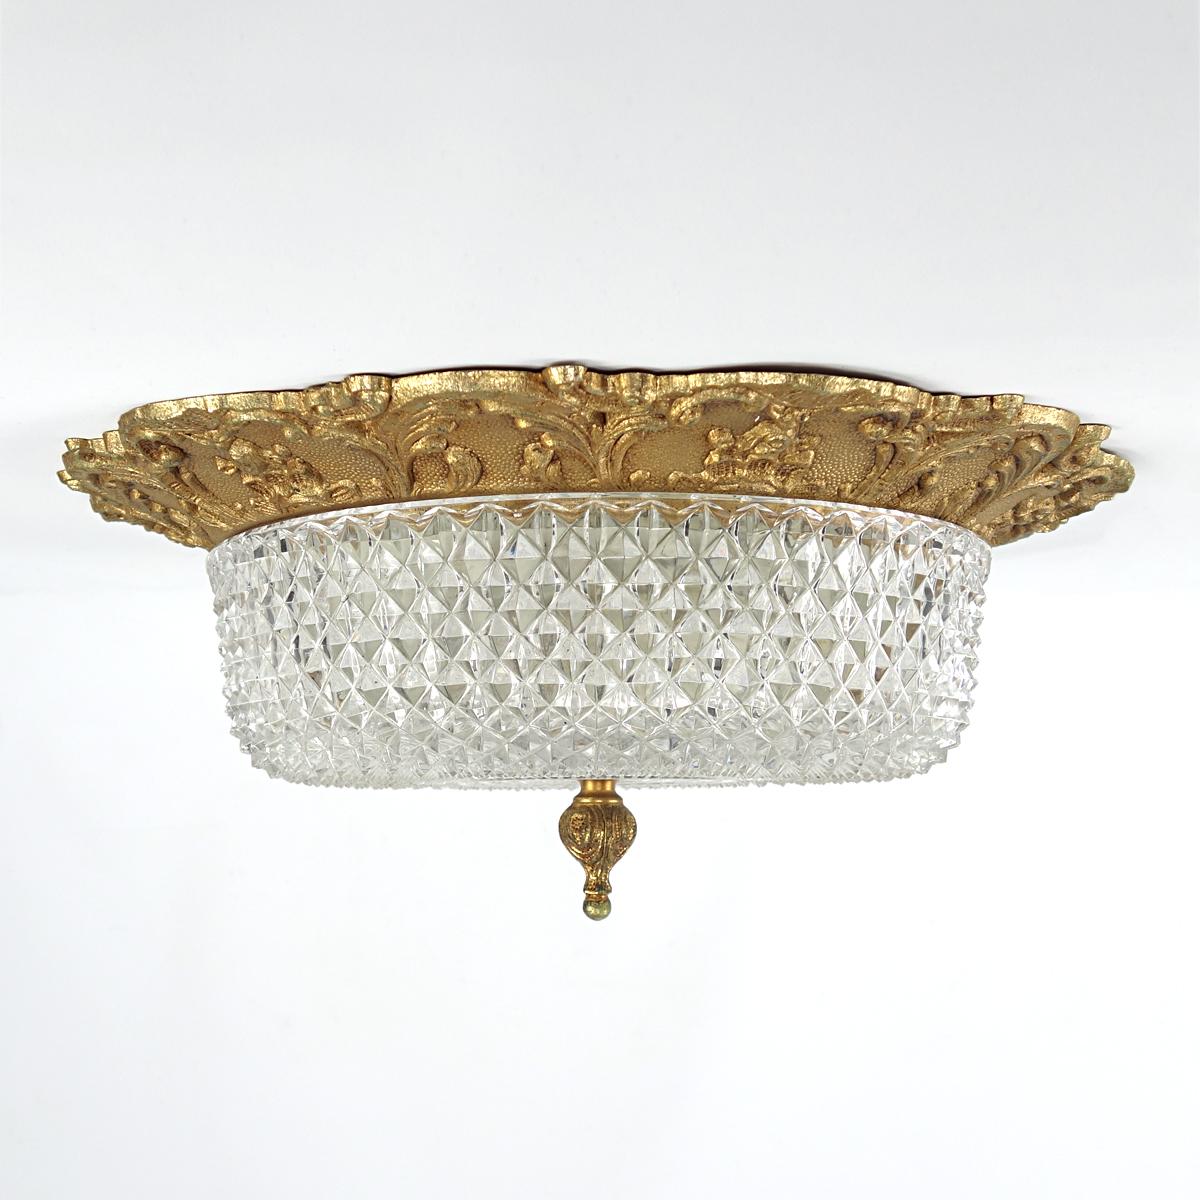 Classic heavily detailed flush mount made of brass and glass. 
The fixture is casted in a French lily motif and the heavy glass shade is cut in a geometric pattern. This causes many planes that cut the light ensuring for a very sparkling effect. A